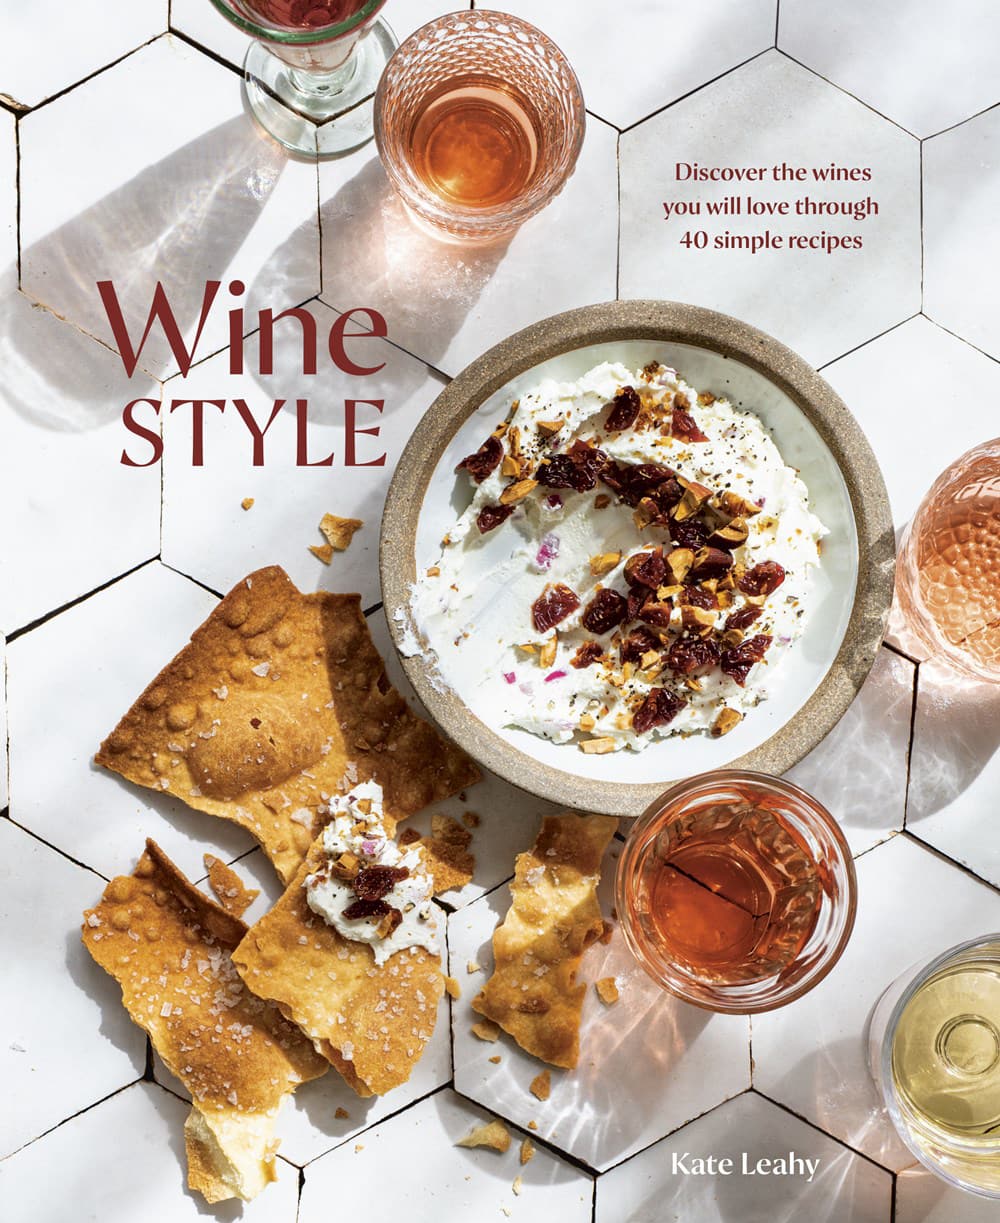 Wine Style Discover the Wines You Will Love Through 50 Simple Recipes Kate Leahy